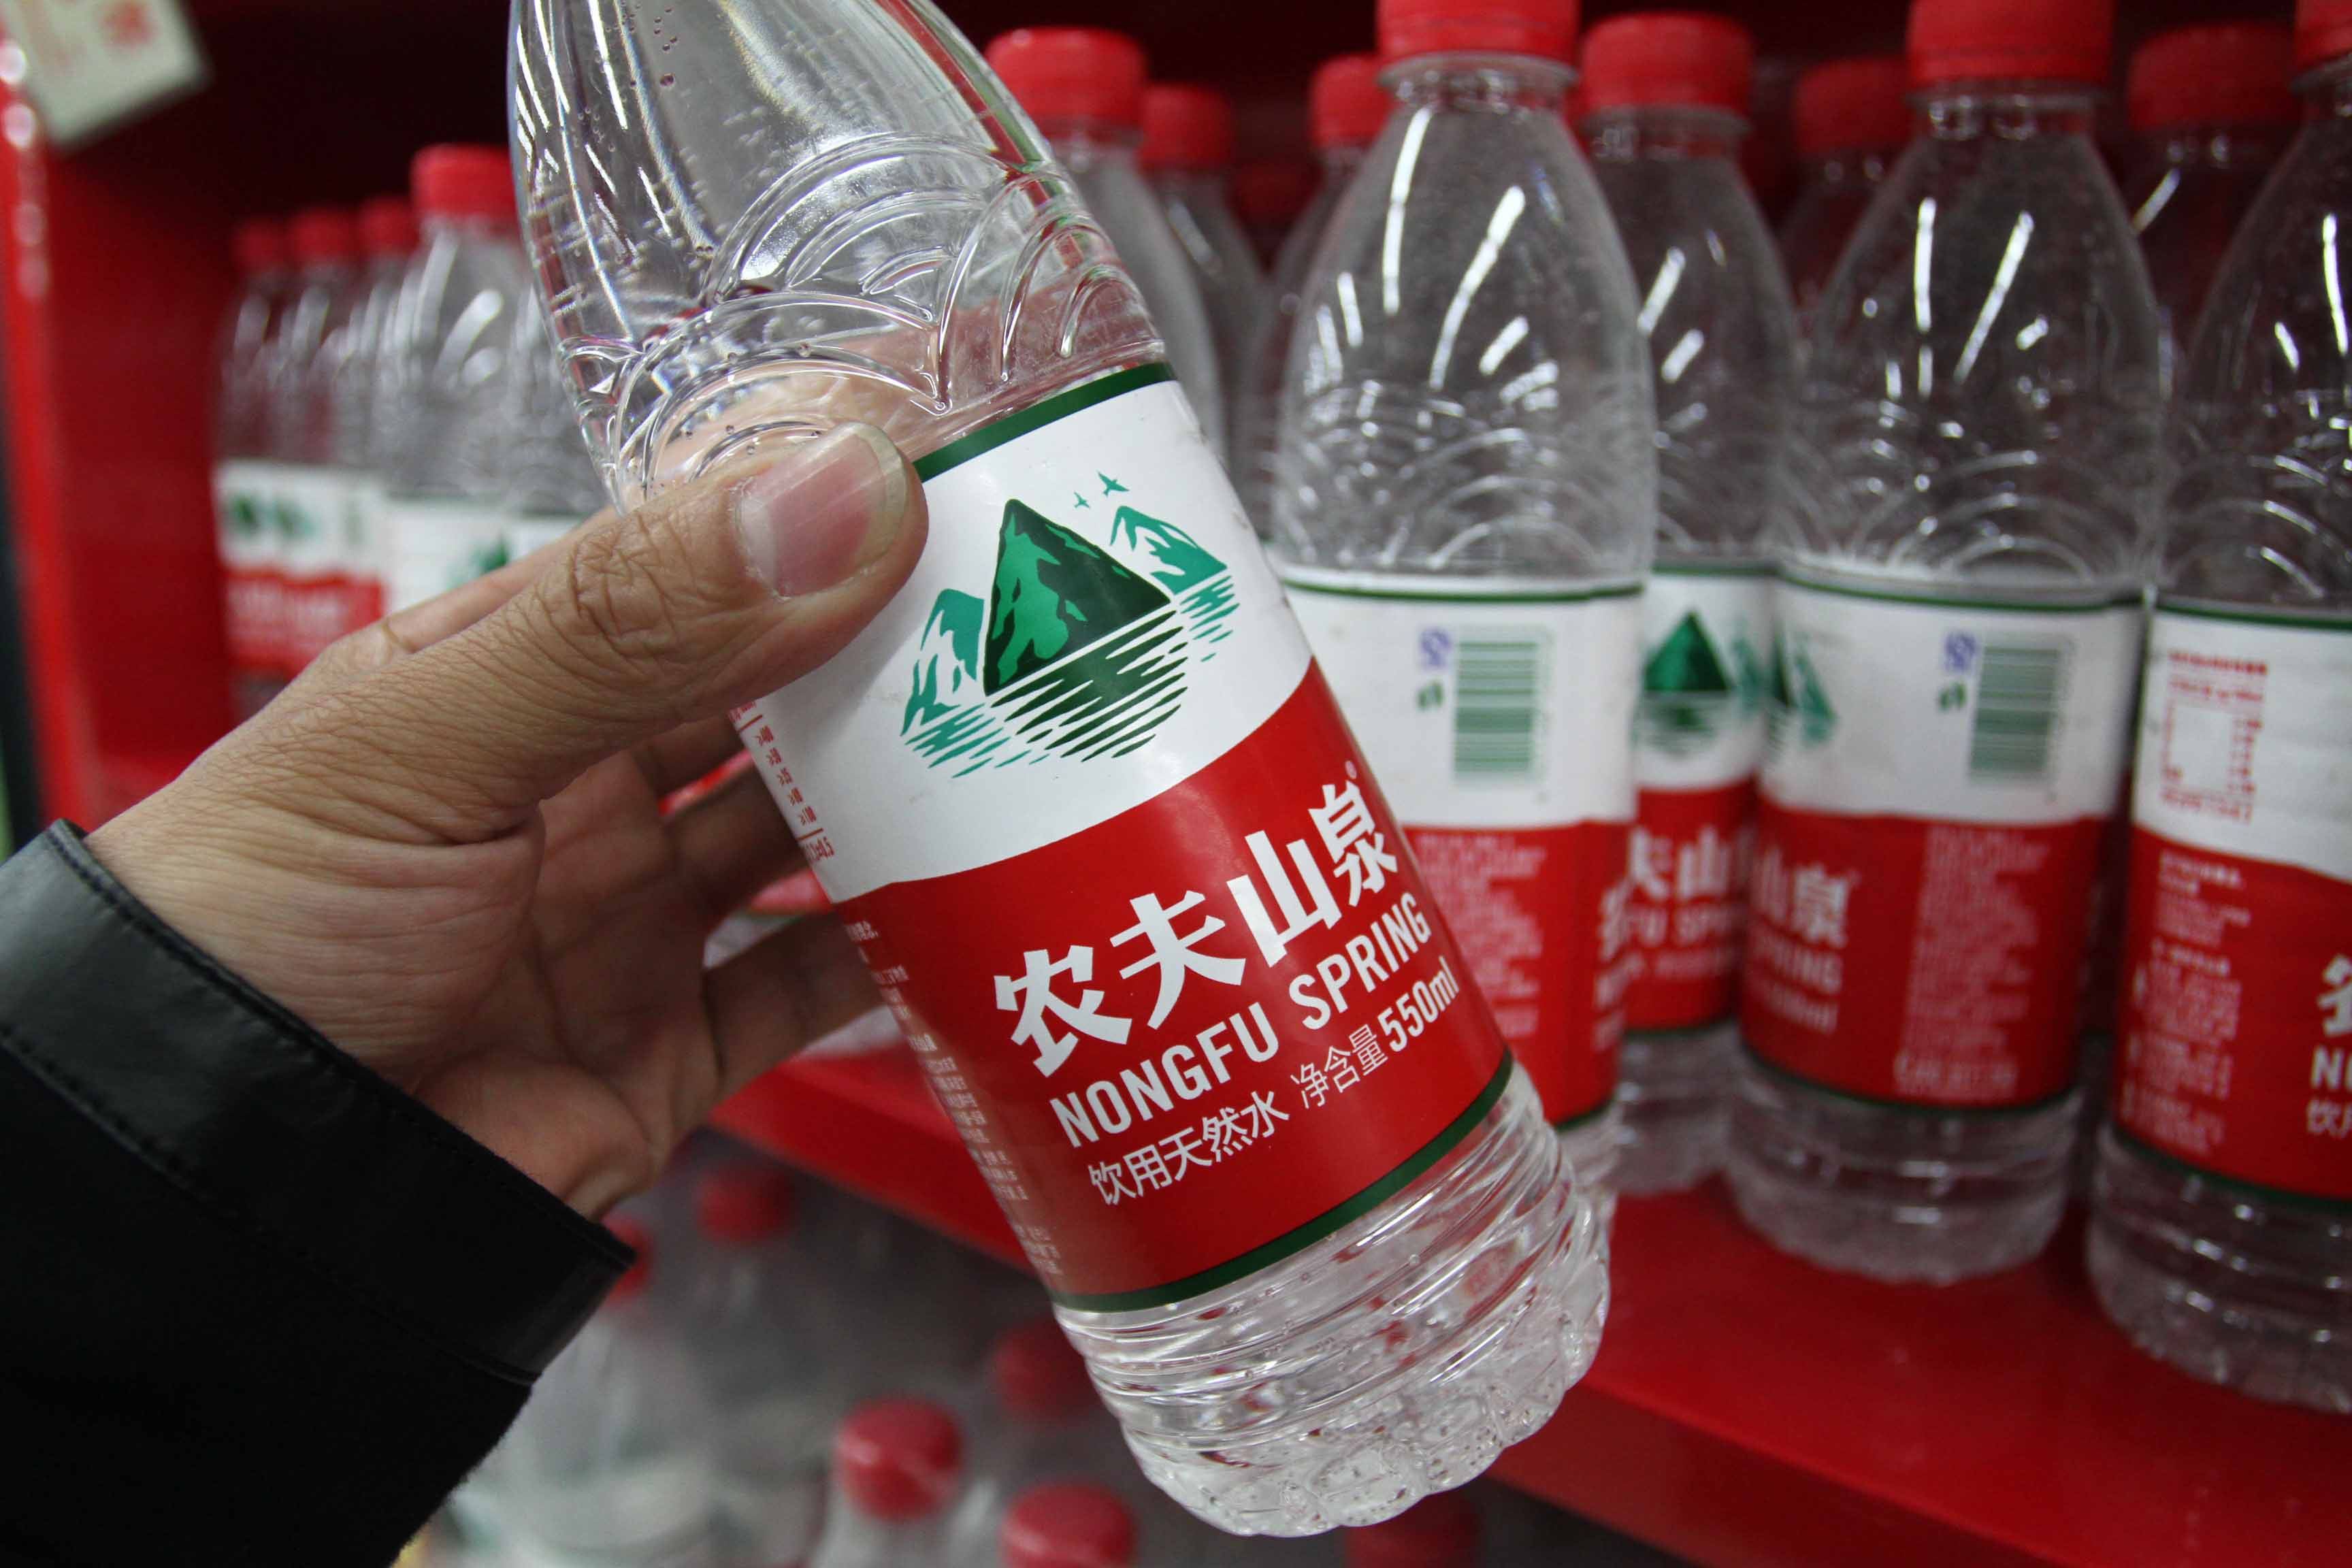 The Nongfu Spring beverage company has come under fire by vocal internet users in recent weeks for a number of perceived transgressions. Photo: Imaginechina via AFP